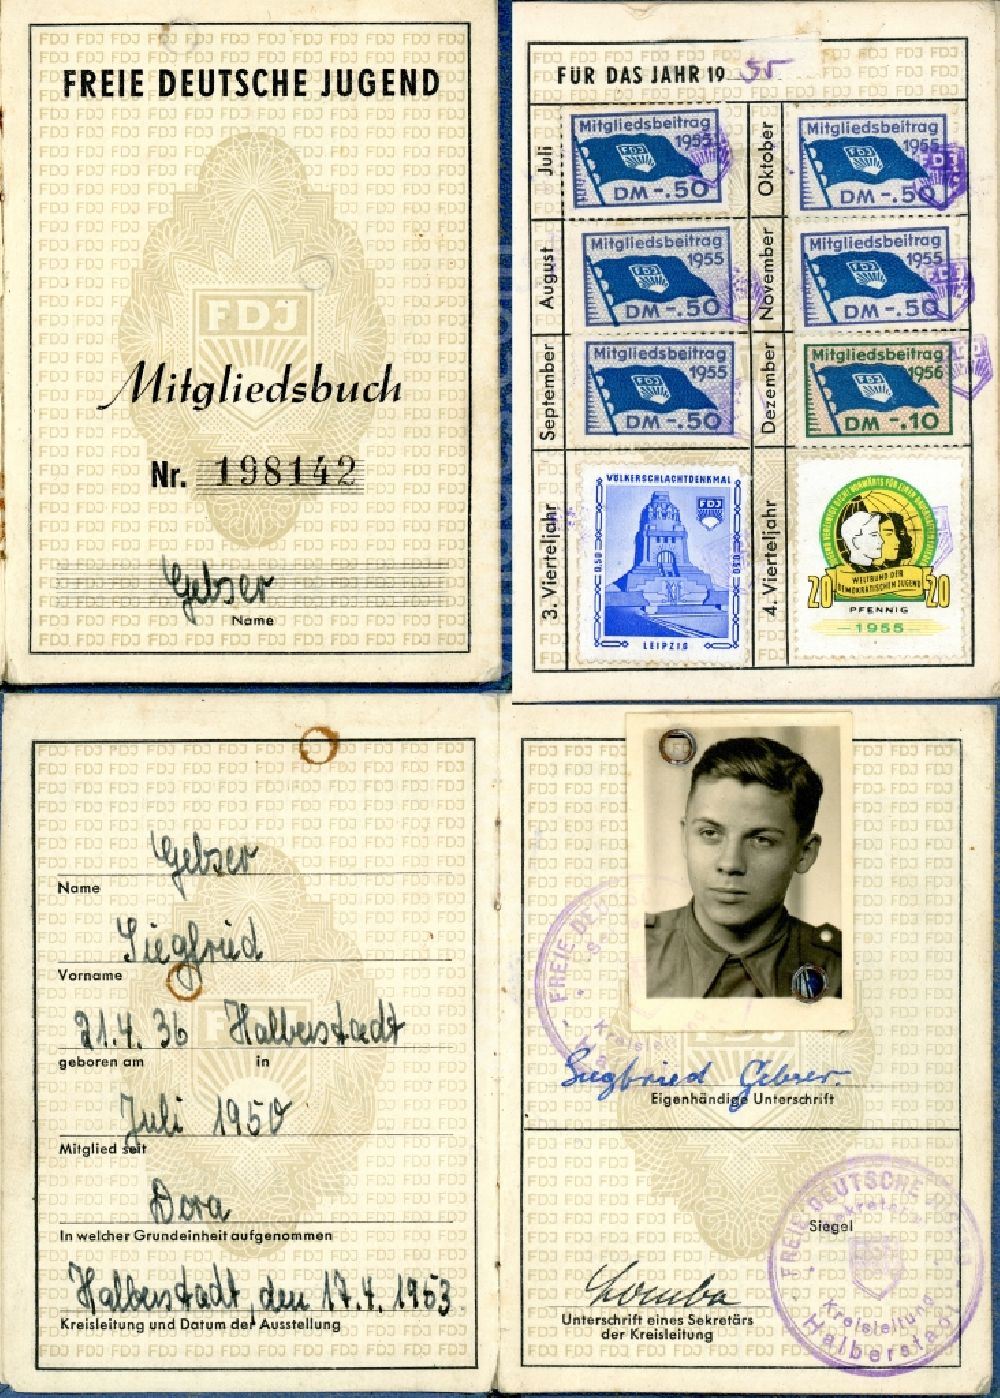 GDR image archive: Halberstadt - Reproduction Membership book - membership card of the FDJ Free German Youth issued in Halberstadt in the state Saxony-Anhalt on the territory of the former GDR, German Democratic Republic